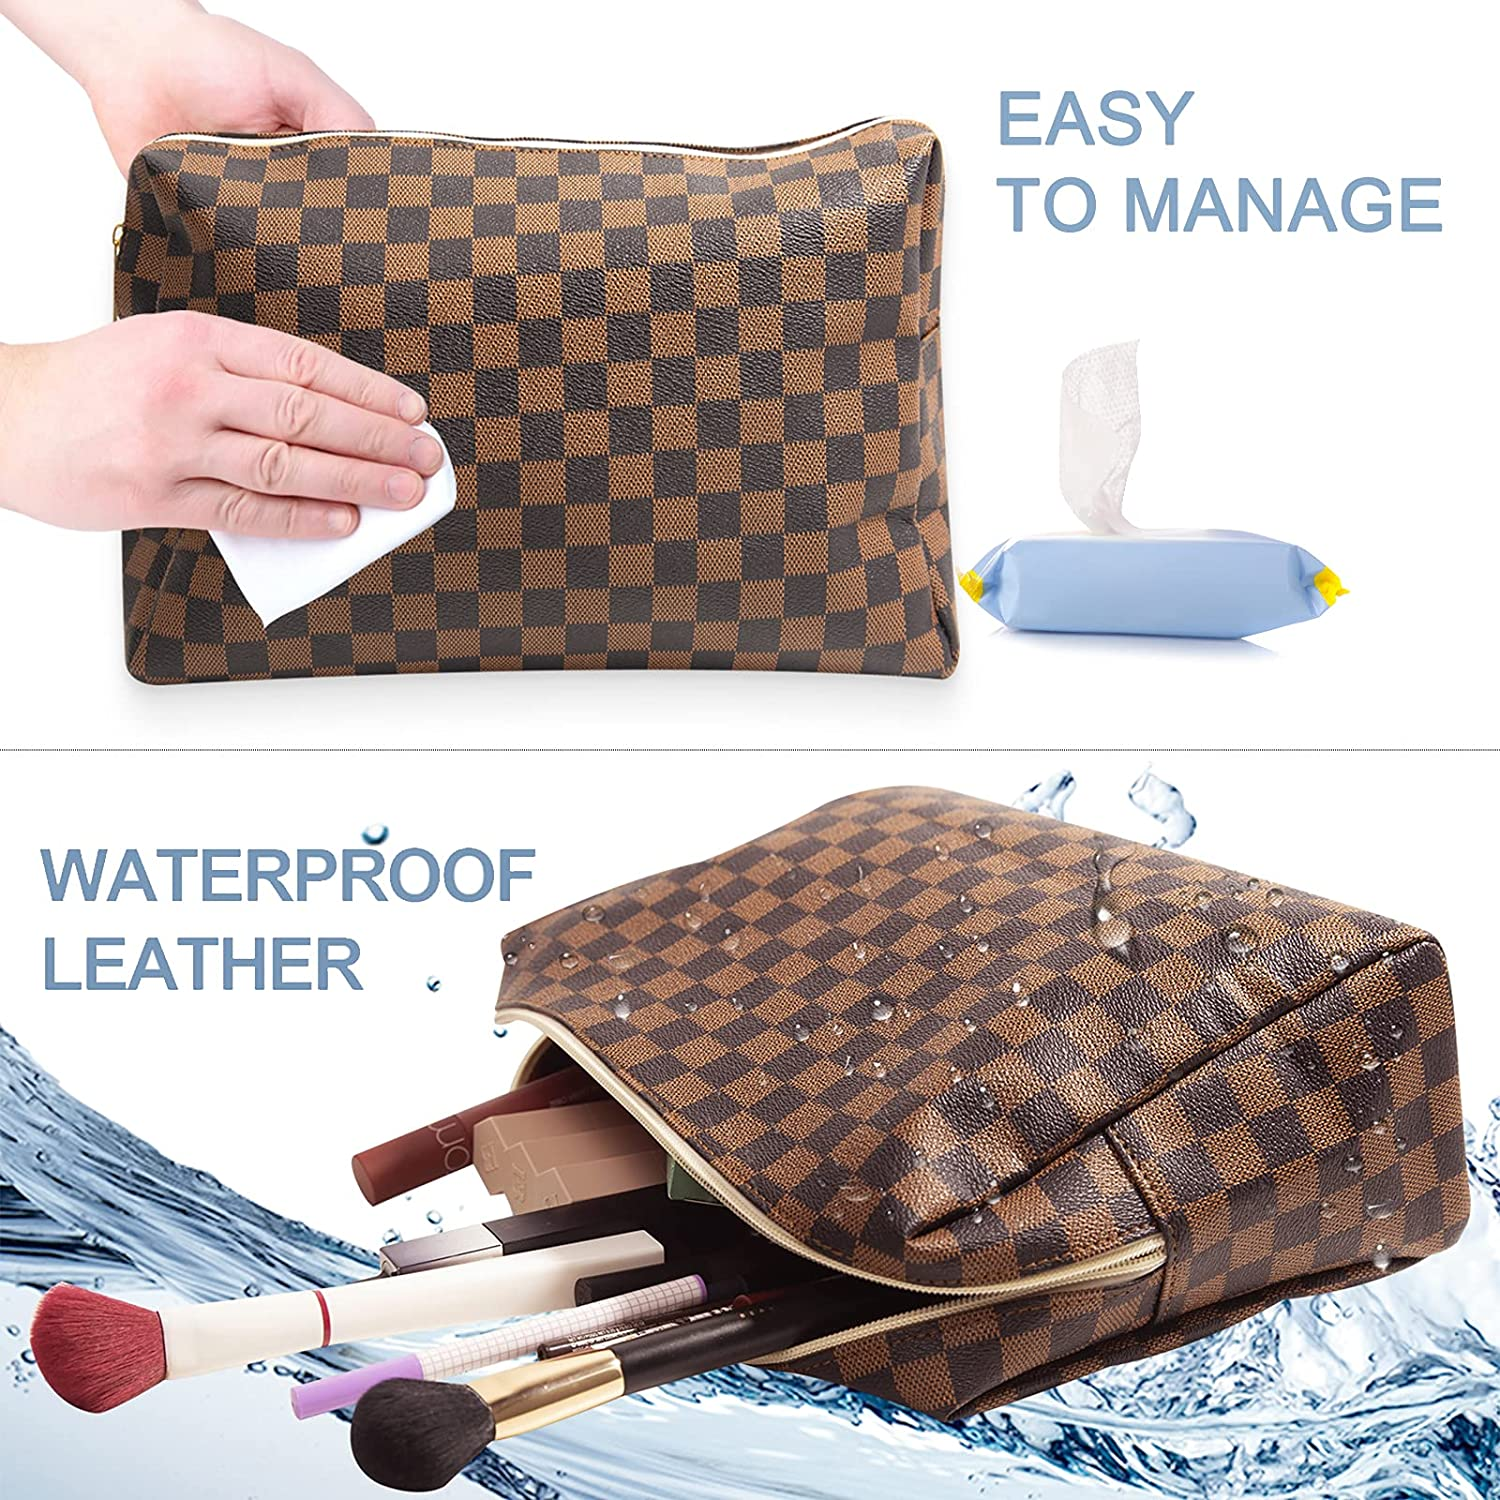 Travel Makeup Bag for Women Pink Checkered Cosmetic Pouch Vegan Leather  Large Retro Toiletry Bag 